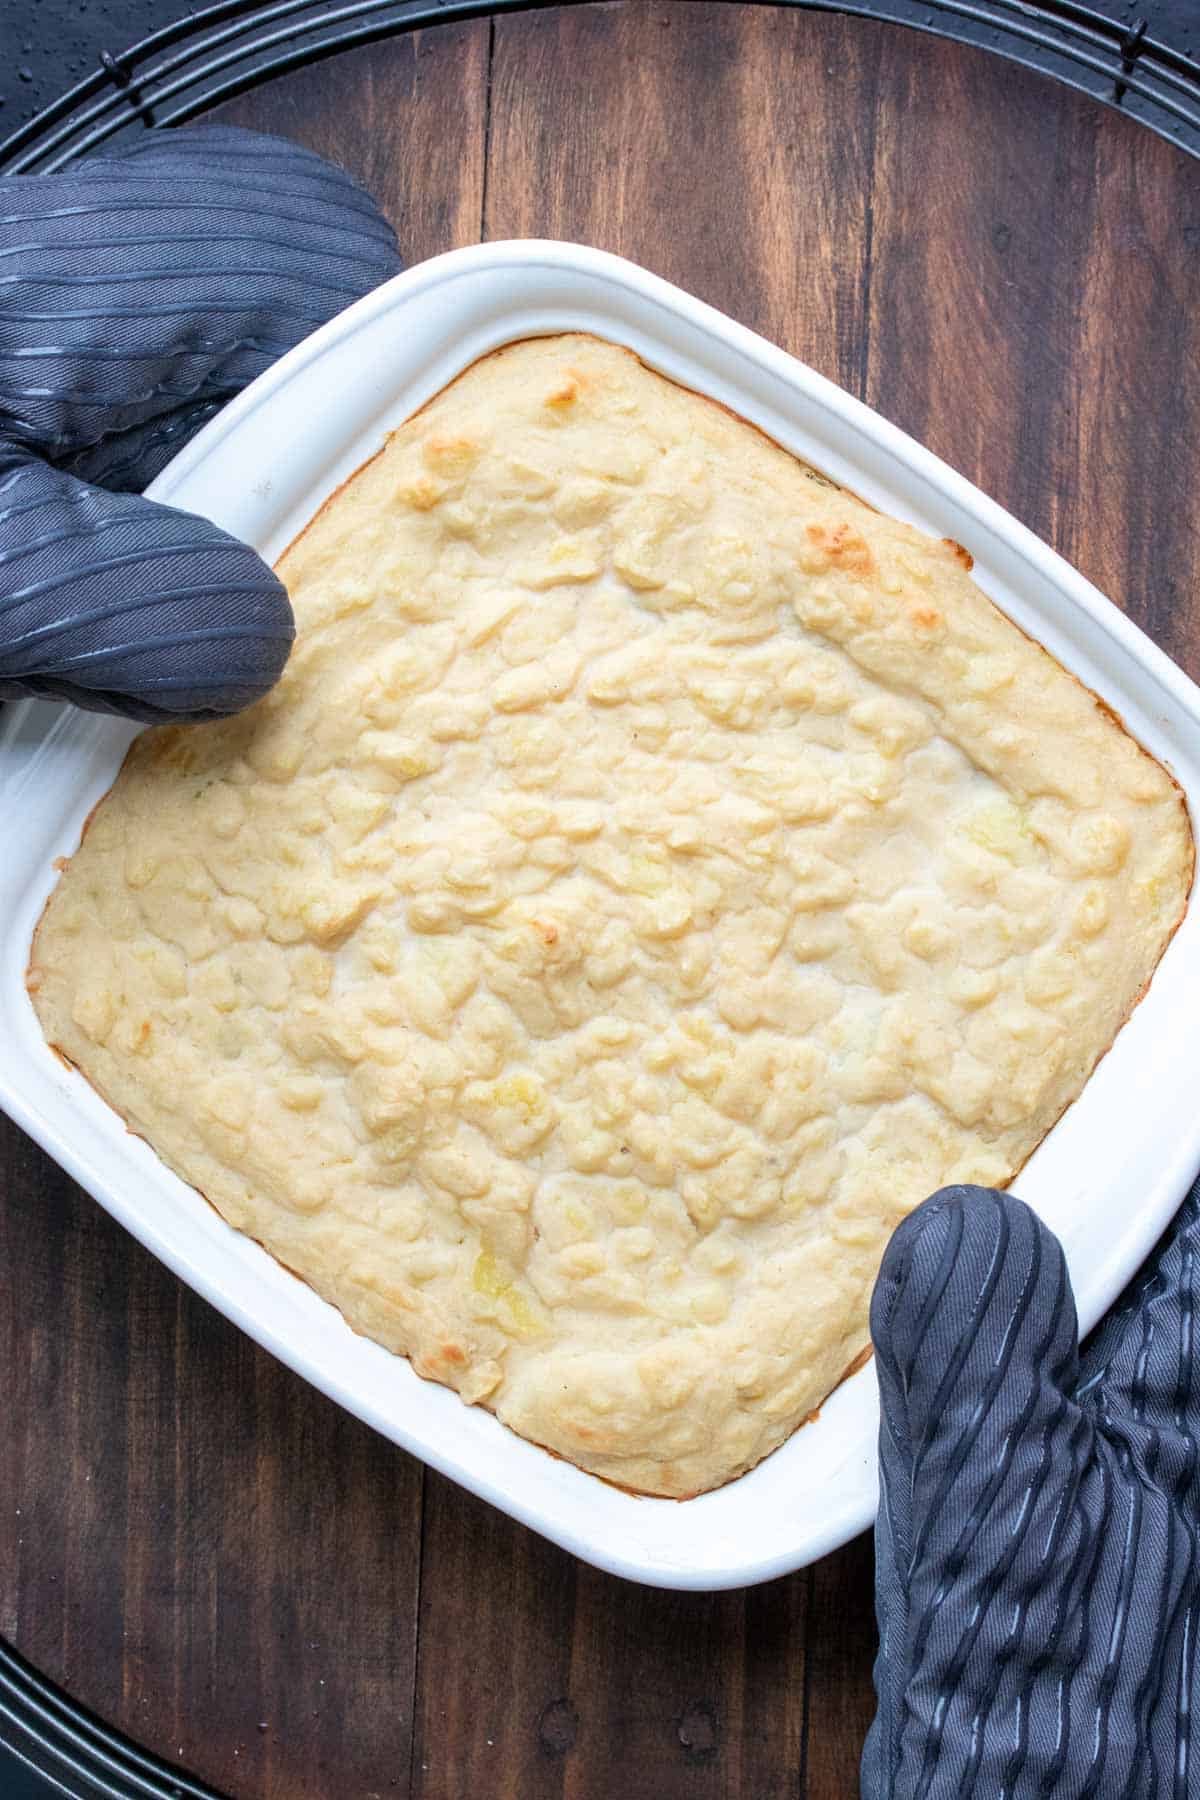 Two hands with oven mitts holding a white square baking dish with a baked casserole that has a potato topping.